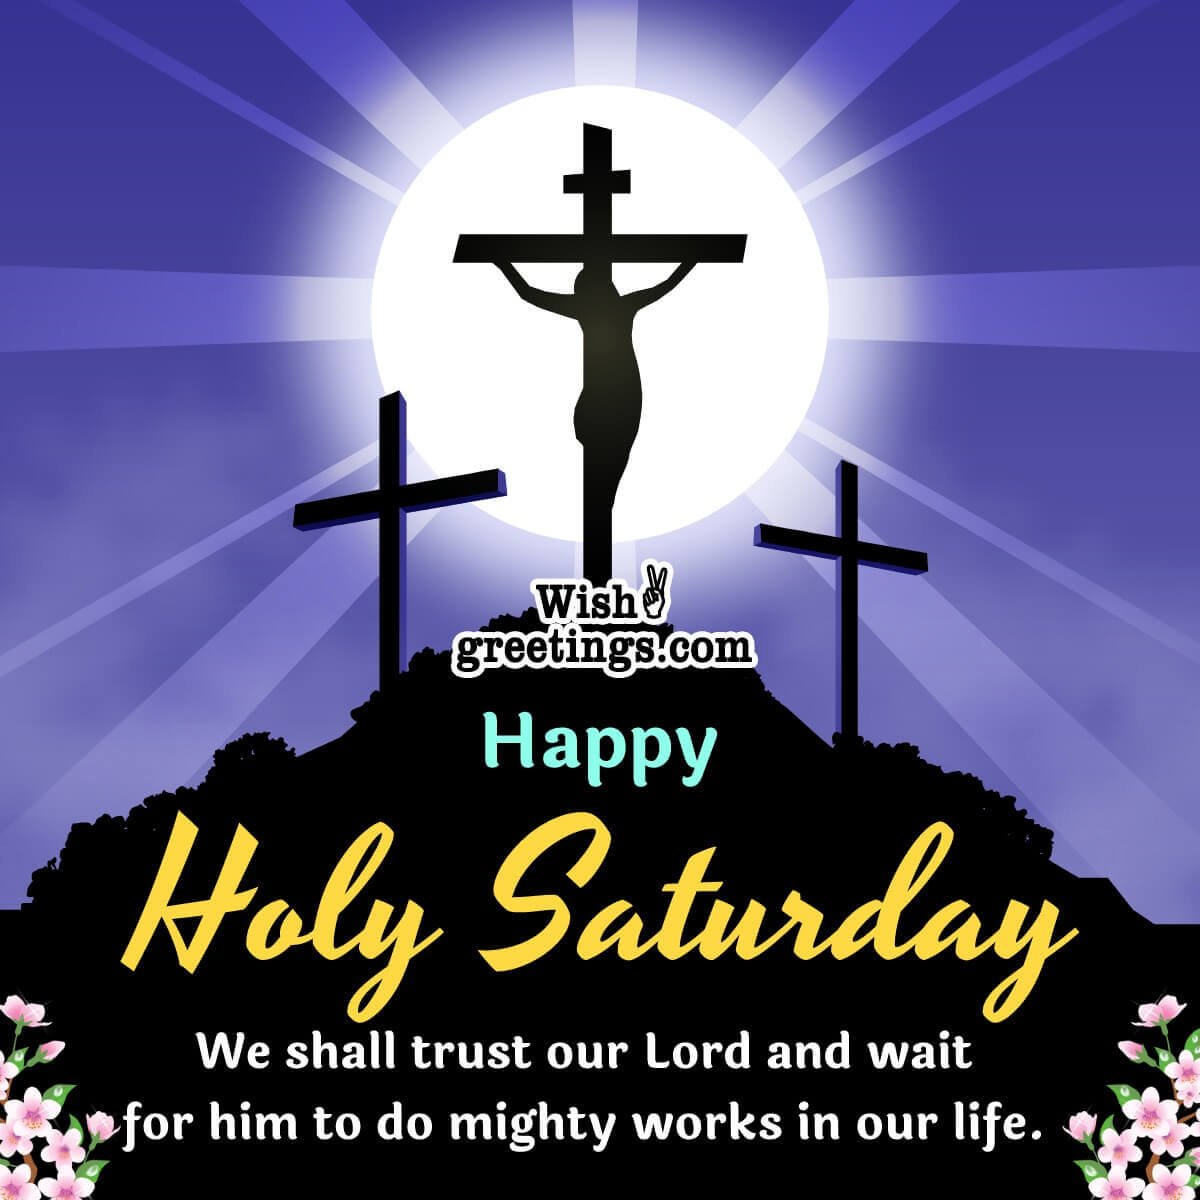 Holy Saturday Wishes Messages - Wish Greetings